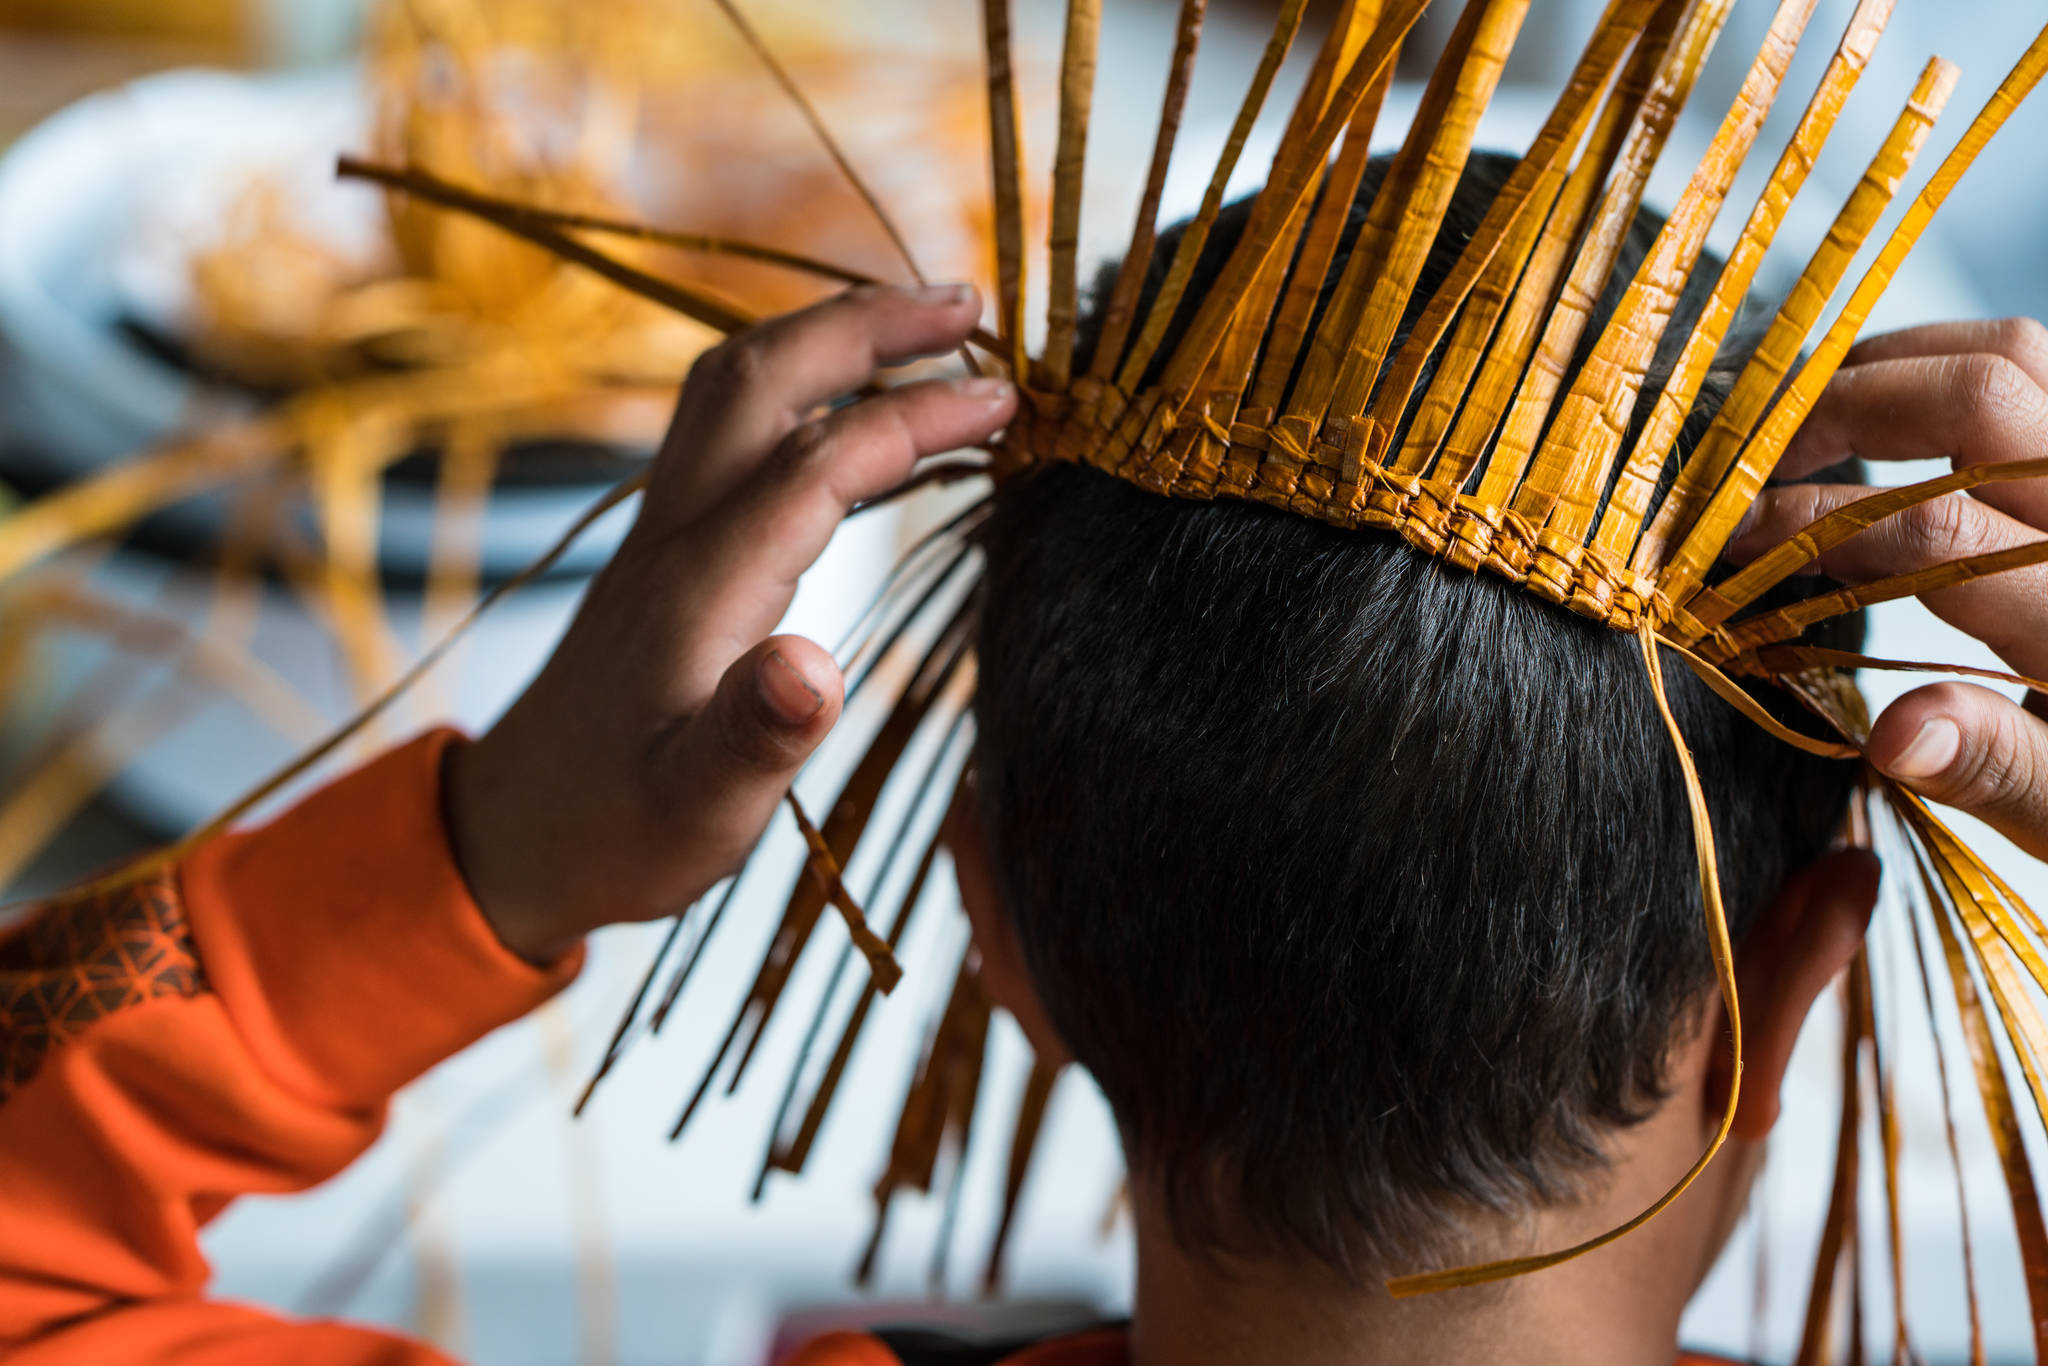 A camper excitedly tries the beginnings of a cedar hat on while learning to weave. (Photo by Bethany Goodrich)